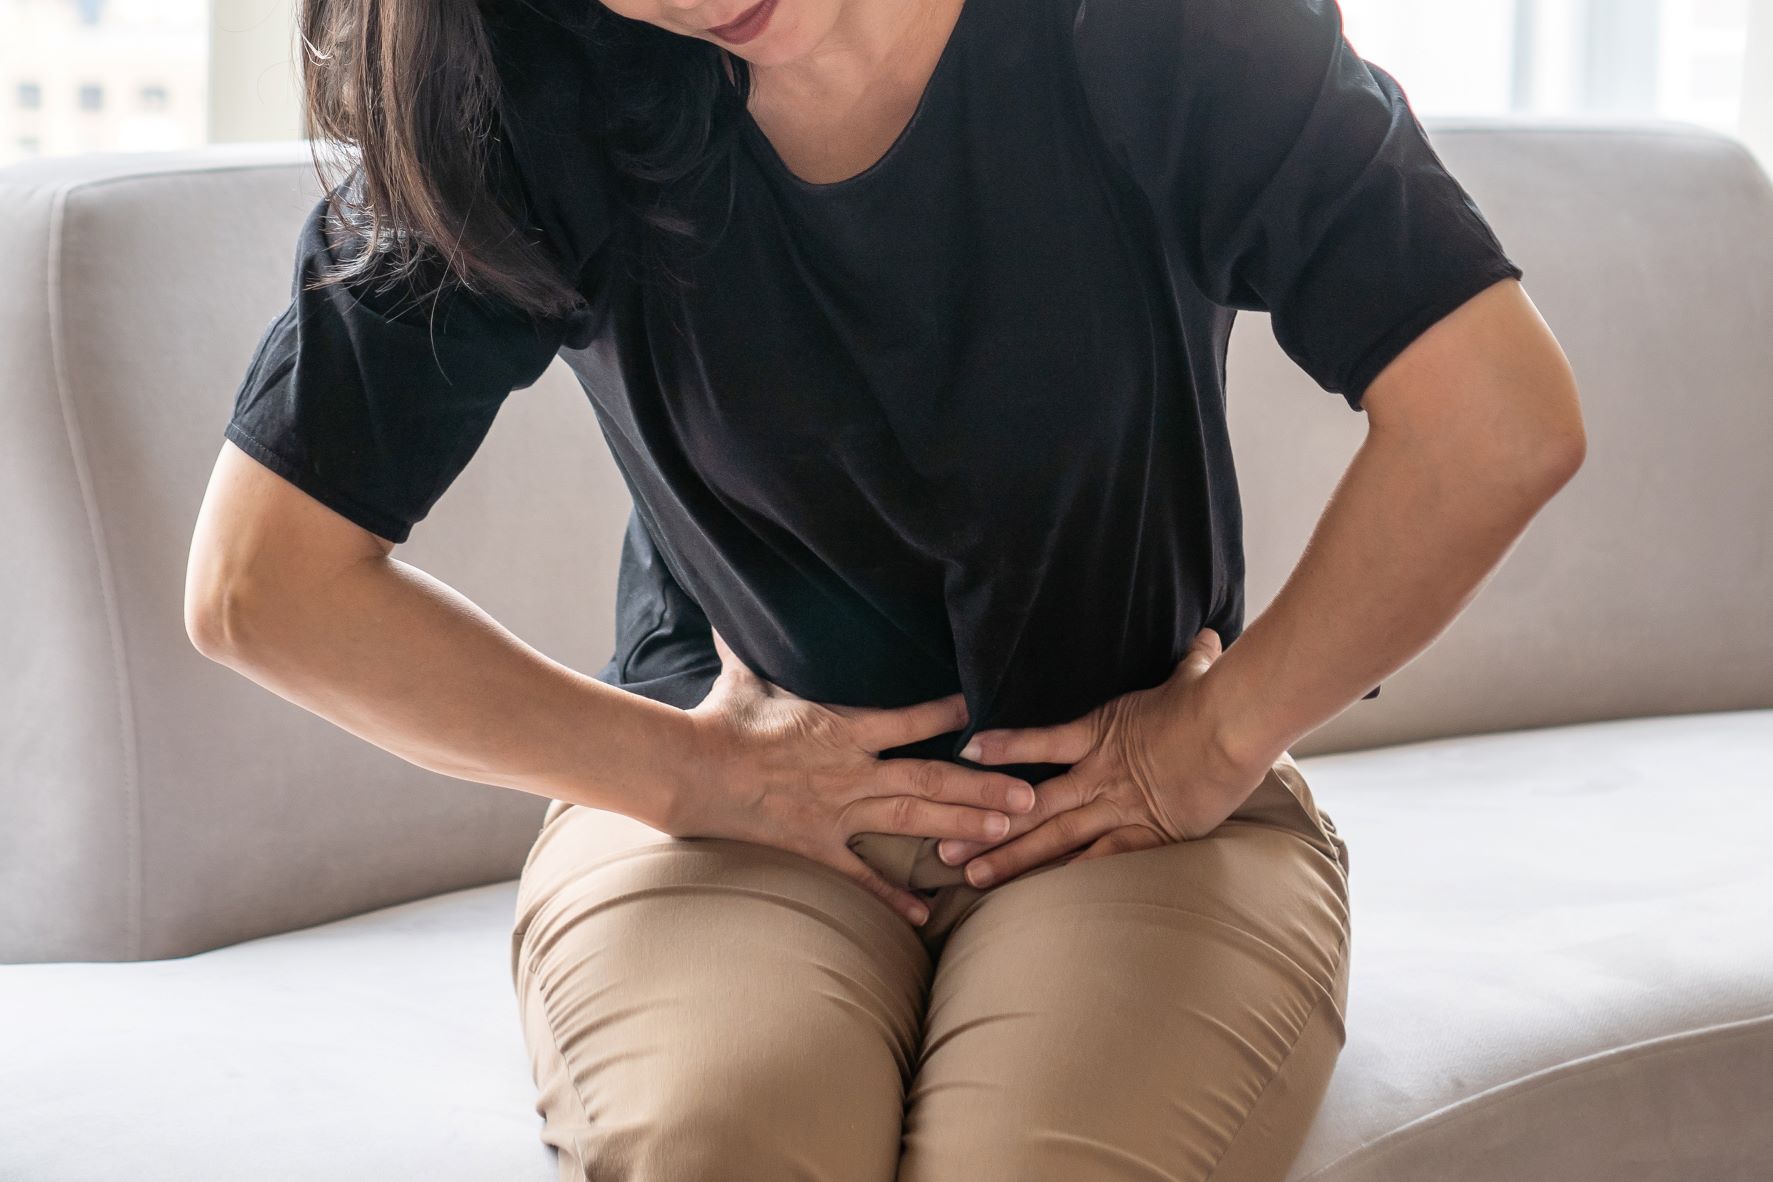 Woman sitting on couch with pelvic pain